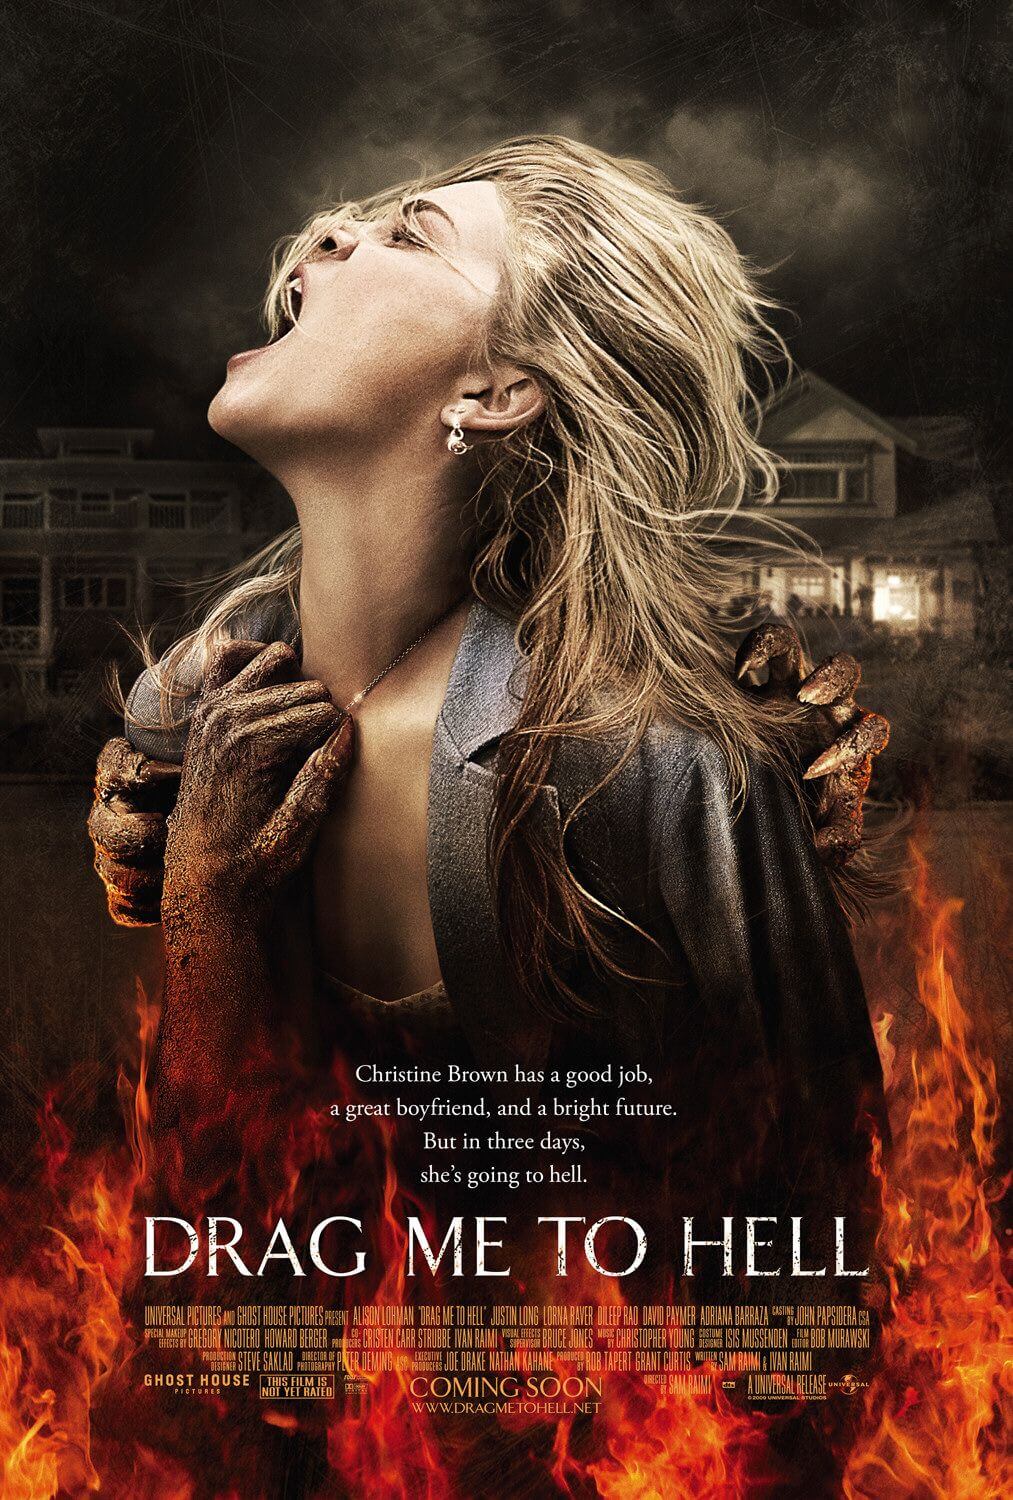 Drag me to hell movie poster